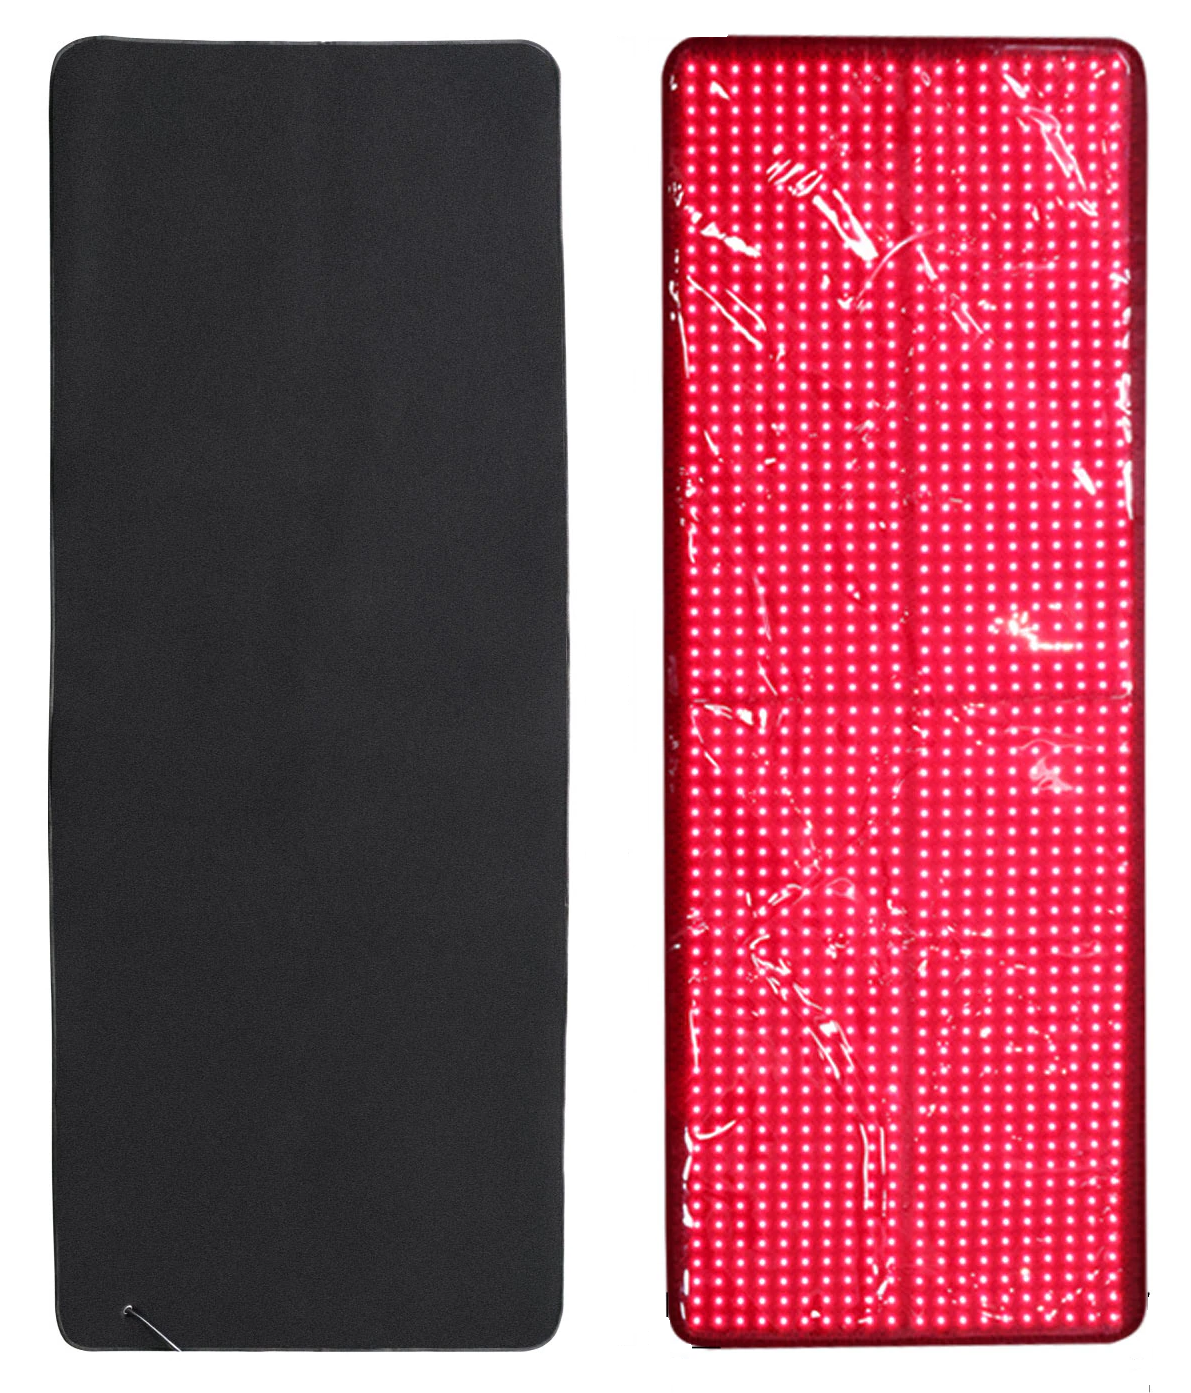 The Radiance MAXX-Light Series | Redlight Therapy Full Body Mat